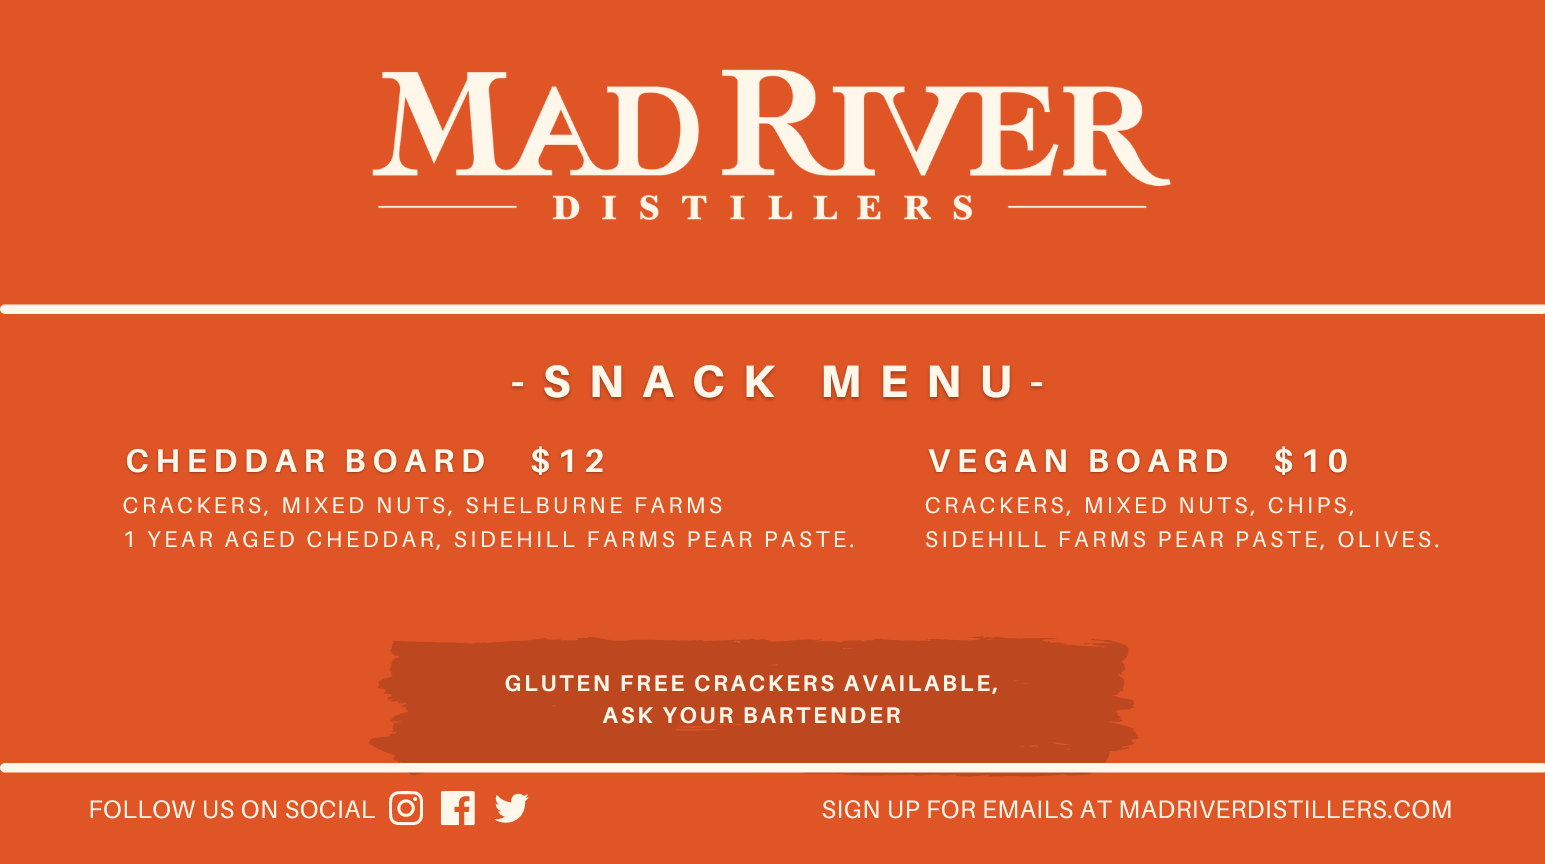 Snack menu includes a Cheddar Board for $12 and a Vegan Board for $10. Cheddar Board includes cheddar, pear paste, mixed nuts and crackers. Vegan Board includes pear paste, olives, mixed nuts, chips and crackers. Gluten free crackers available.